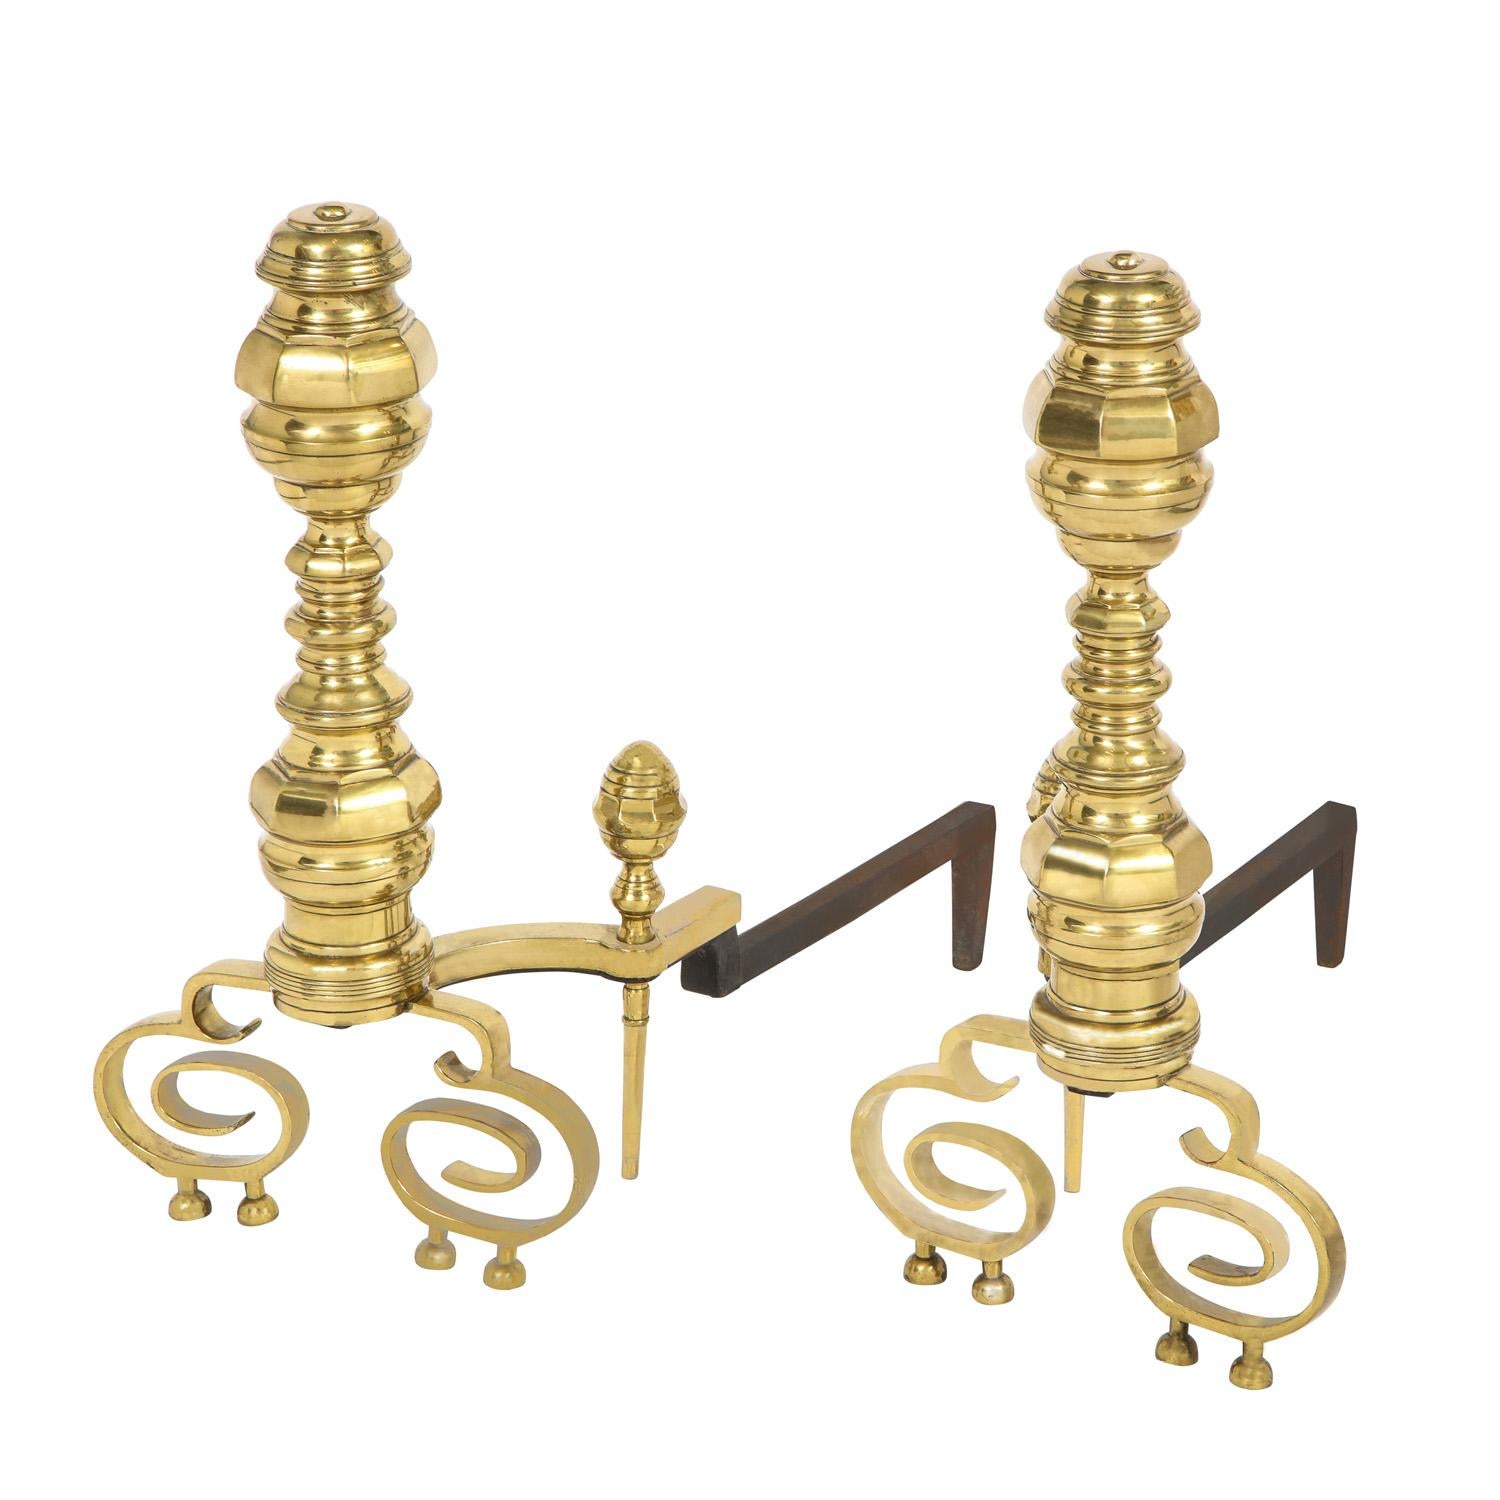 Mid-Century Modern Pair of Artisan Andirons in Polished Brass and Wrought-Iron 1970s For Sale